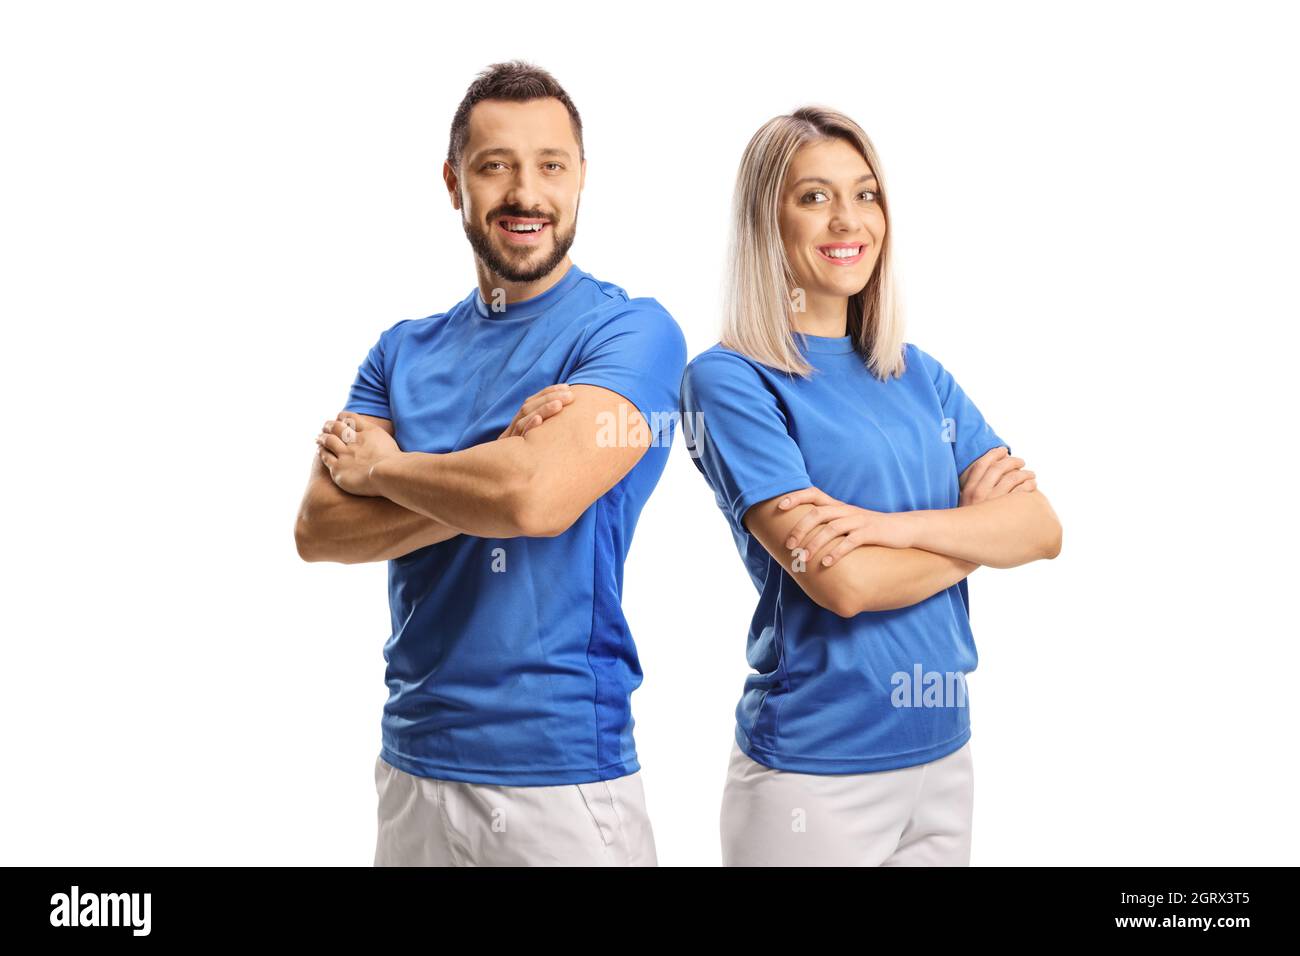 Portrait of a young male and female wearing blue sport jersey and posing with crossed hands isolated on white background Stock Photo